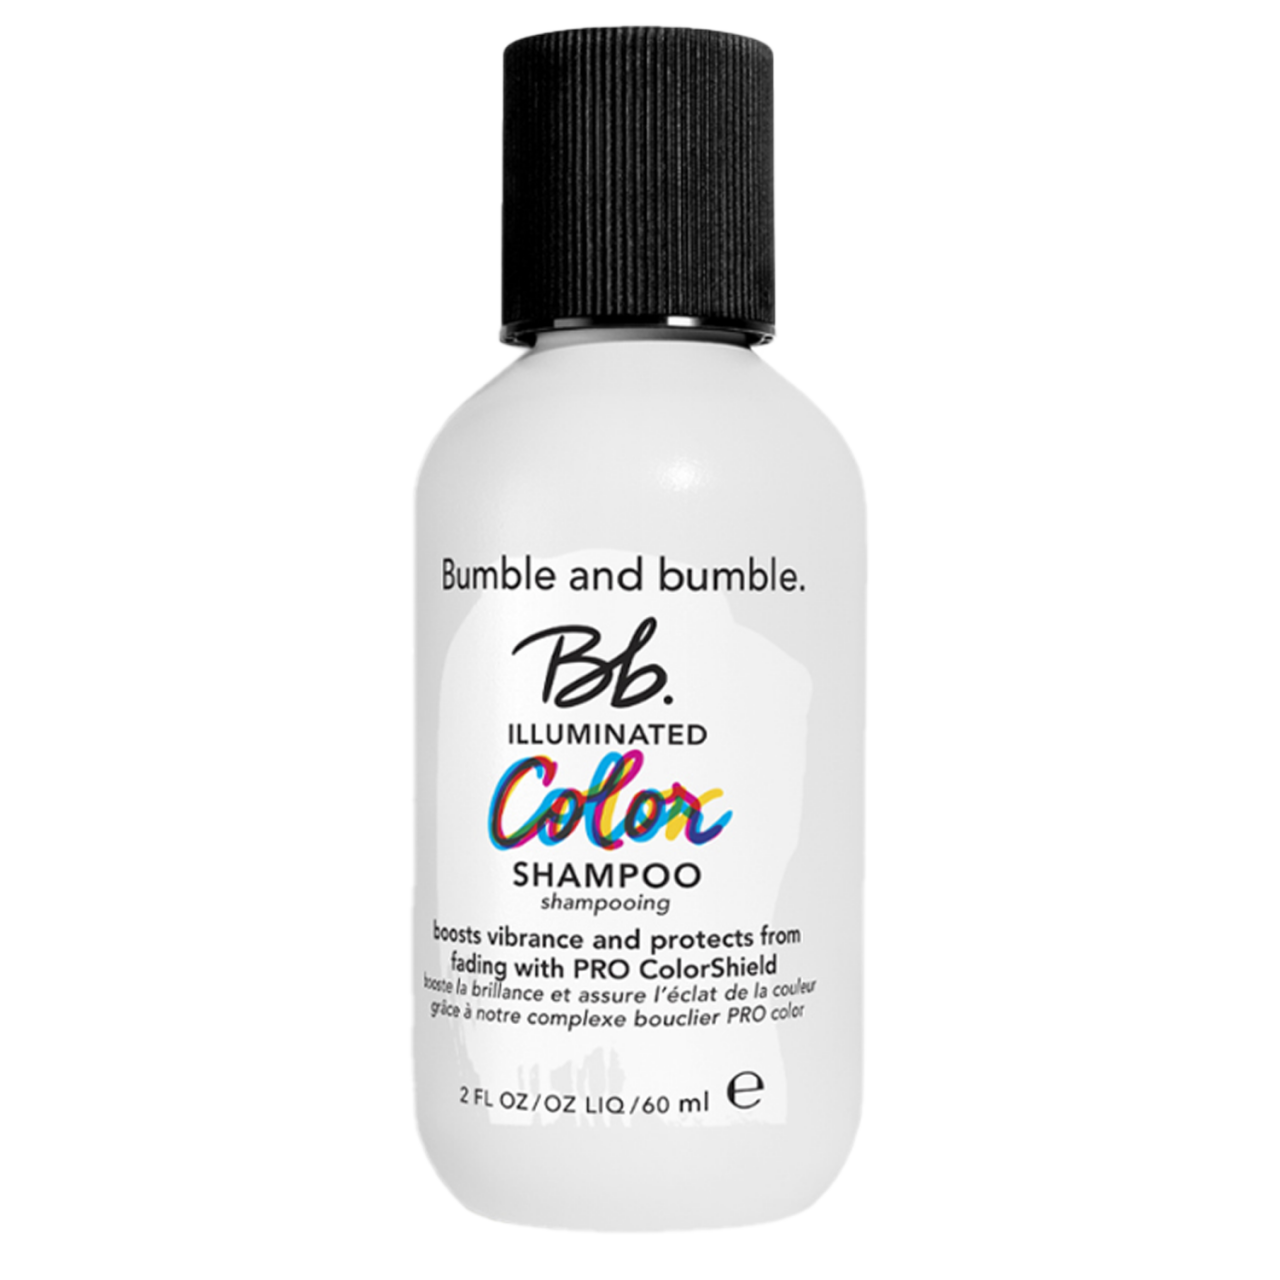 Bb. Color - Illuminated Color Shampoo von Bumble and bumble.